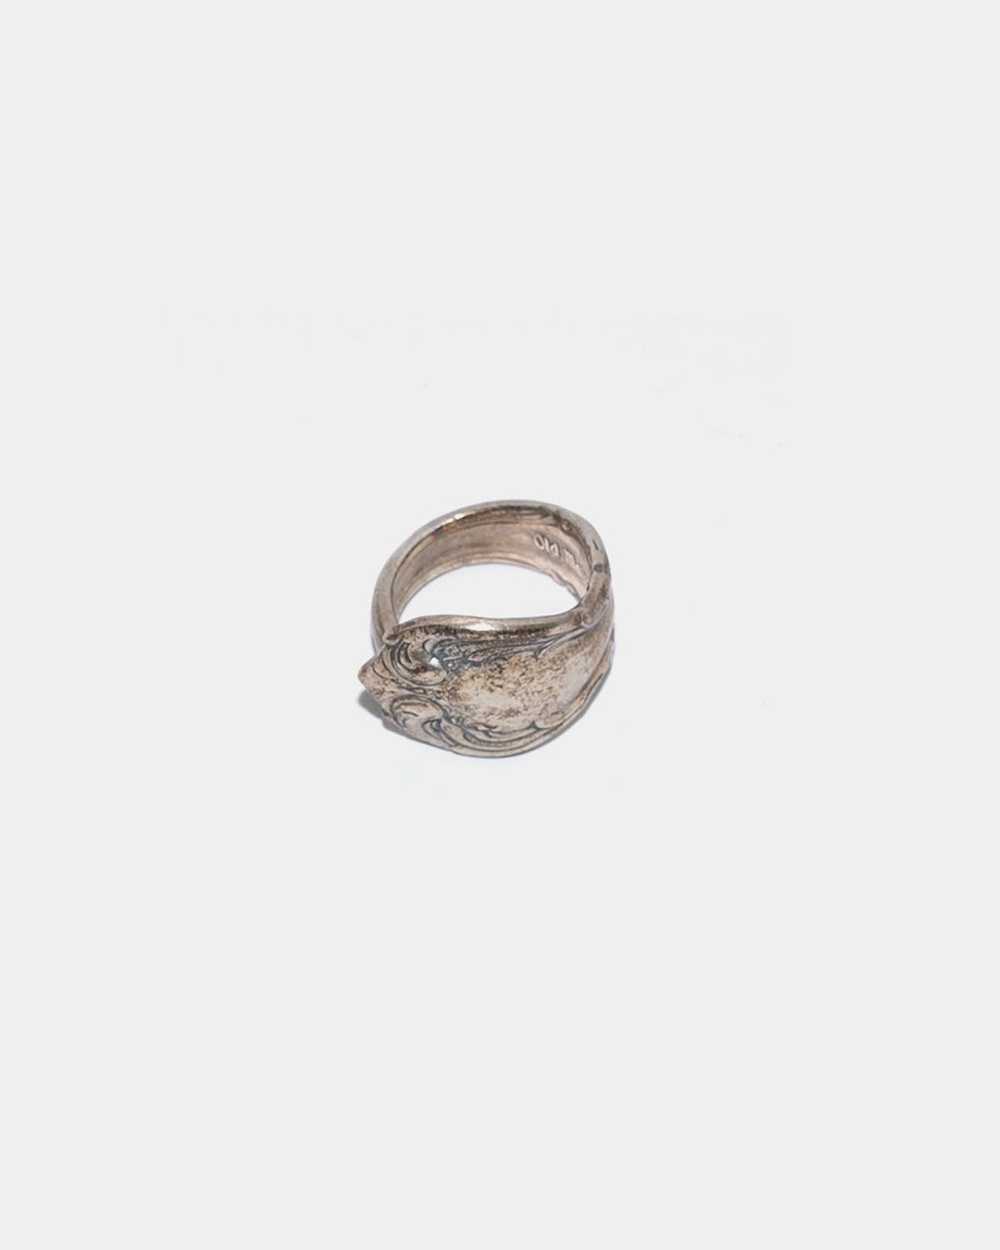 Vintage Sterling silver spoon ring - image 1